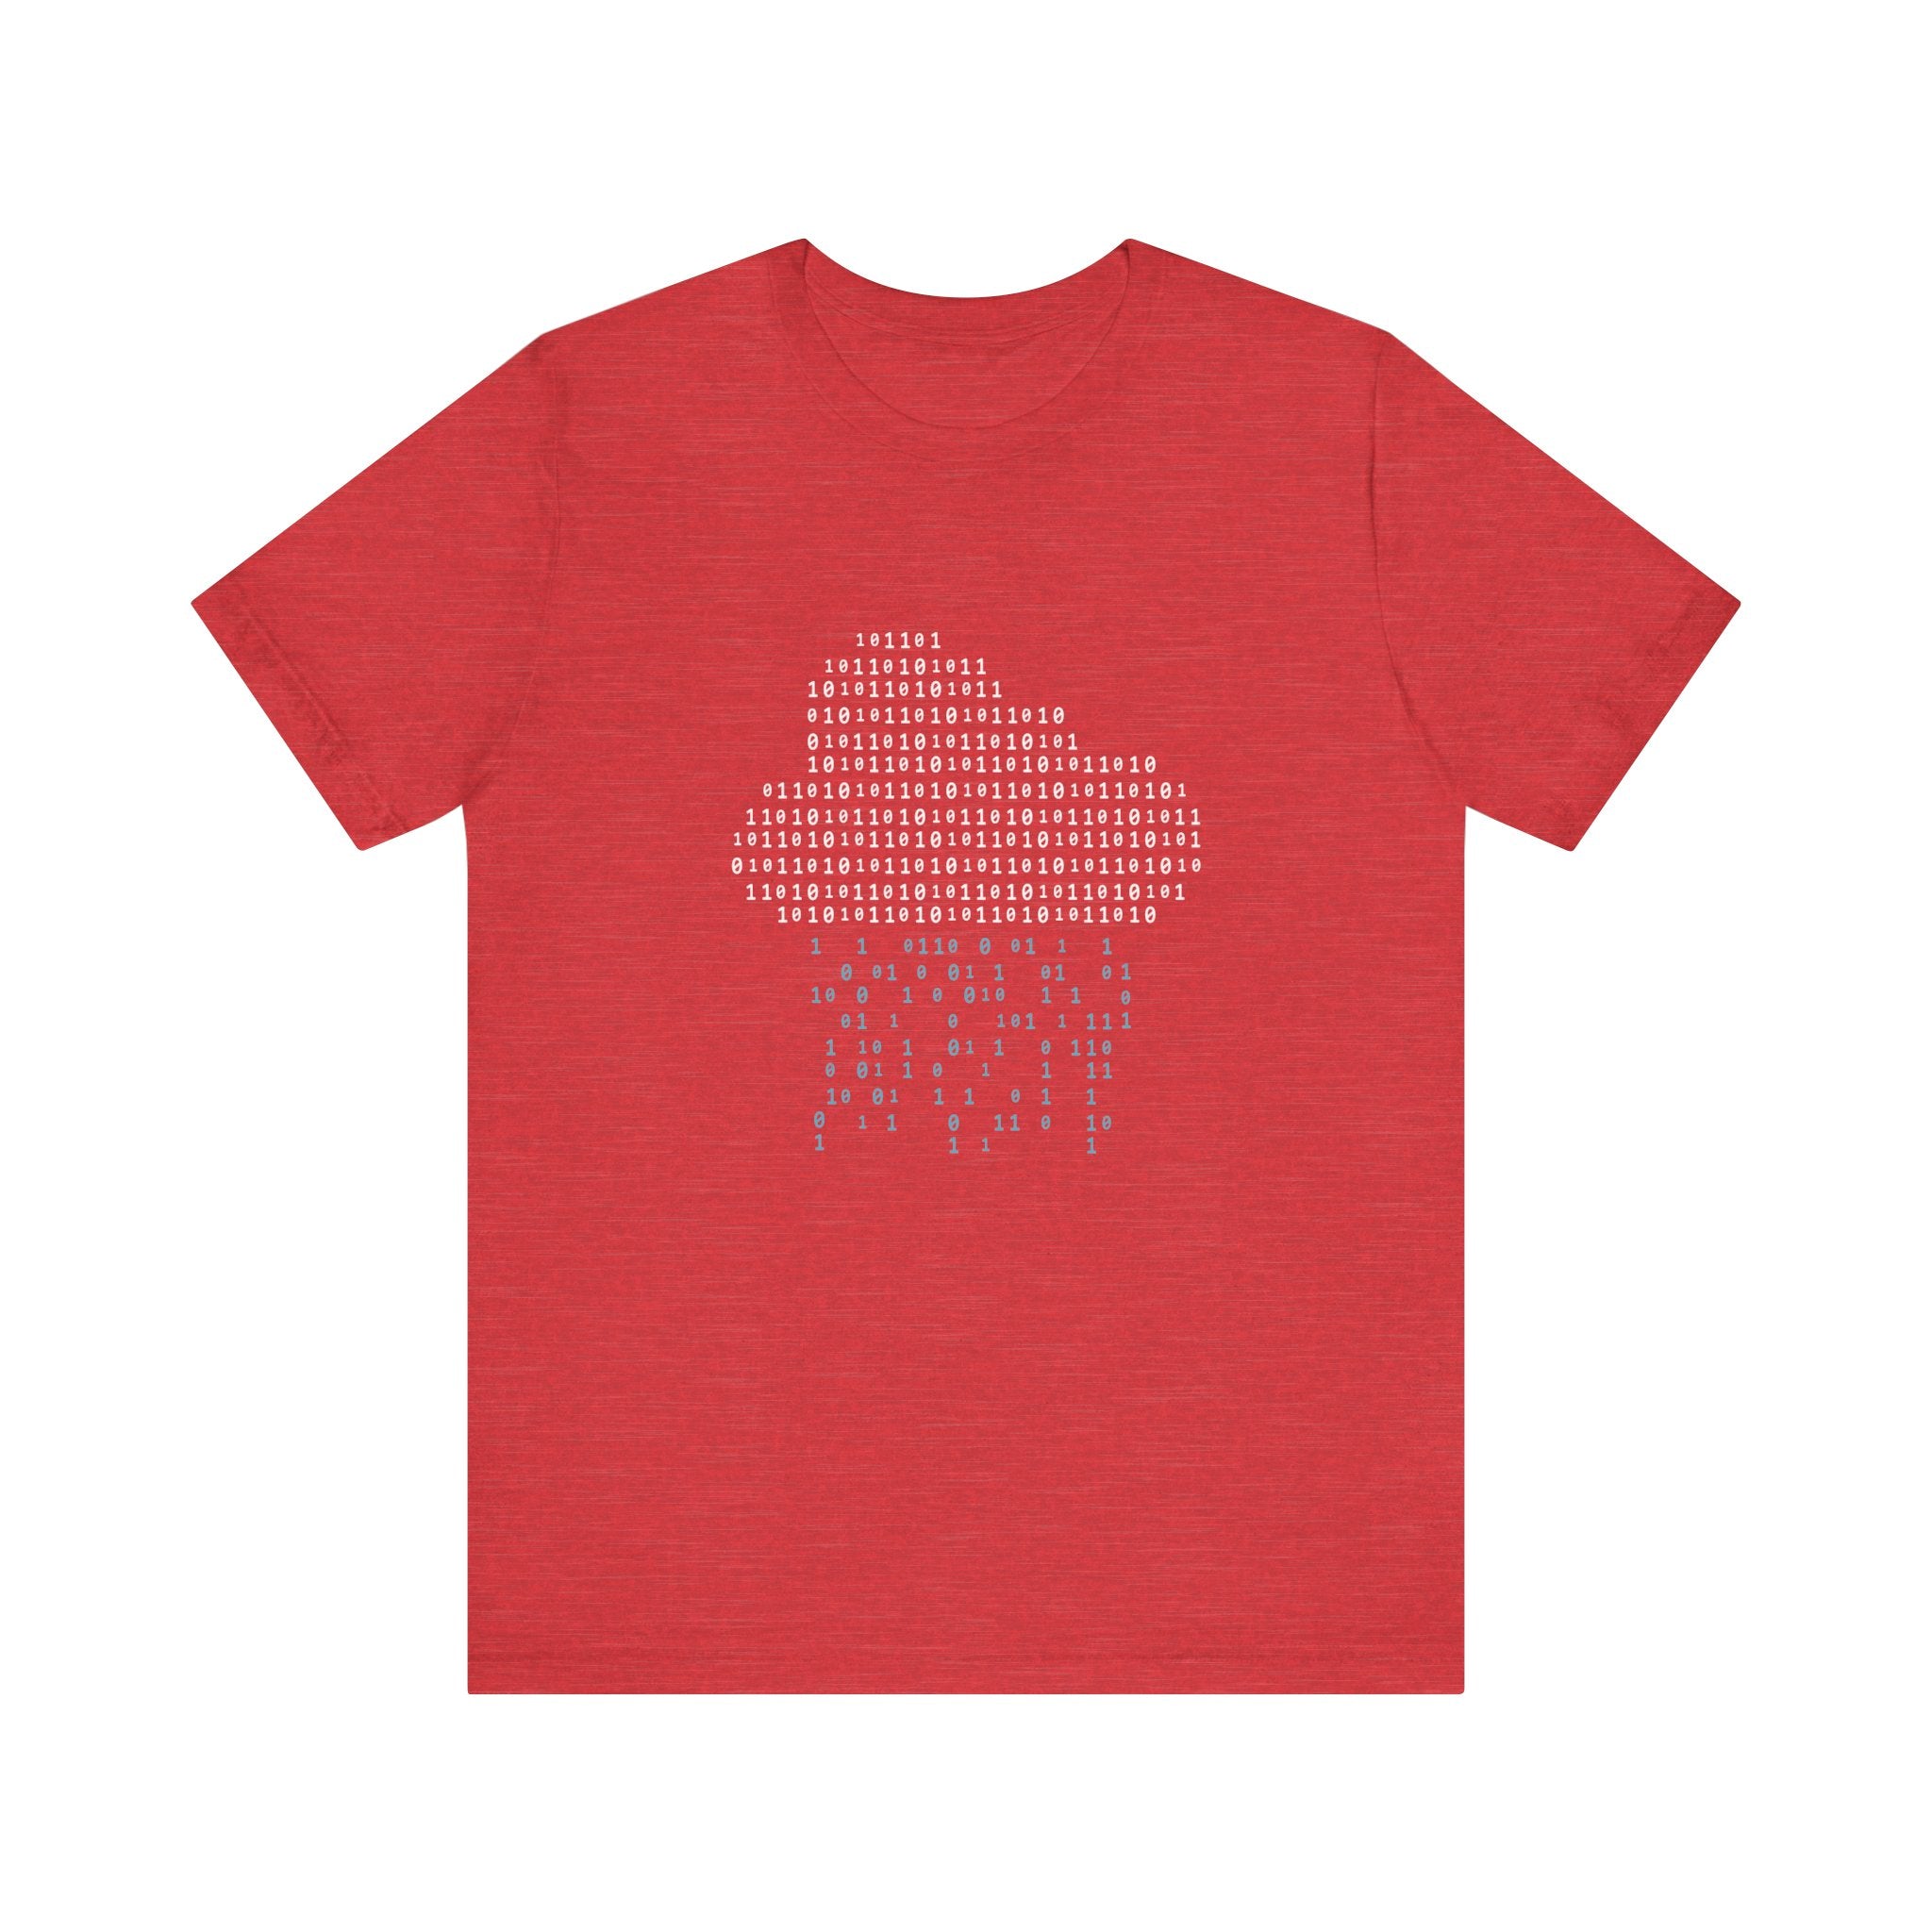 Binary Rain Cloud - T-Shirt with a binary code cloud and rain design on the front, crafted from soft Airlume combed ring-spun cotton. Part of our exclusive Binary Rain Cloud tees collection.